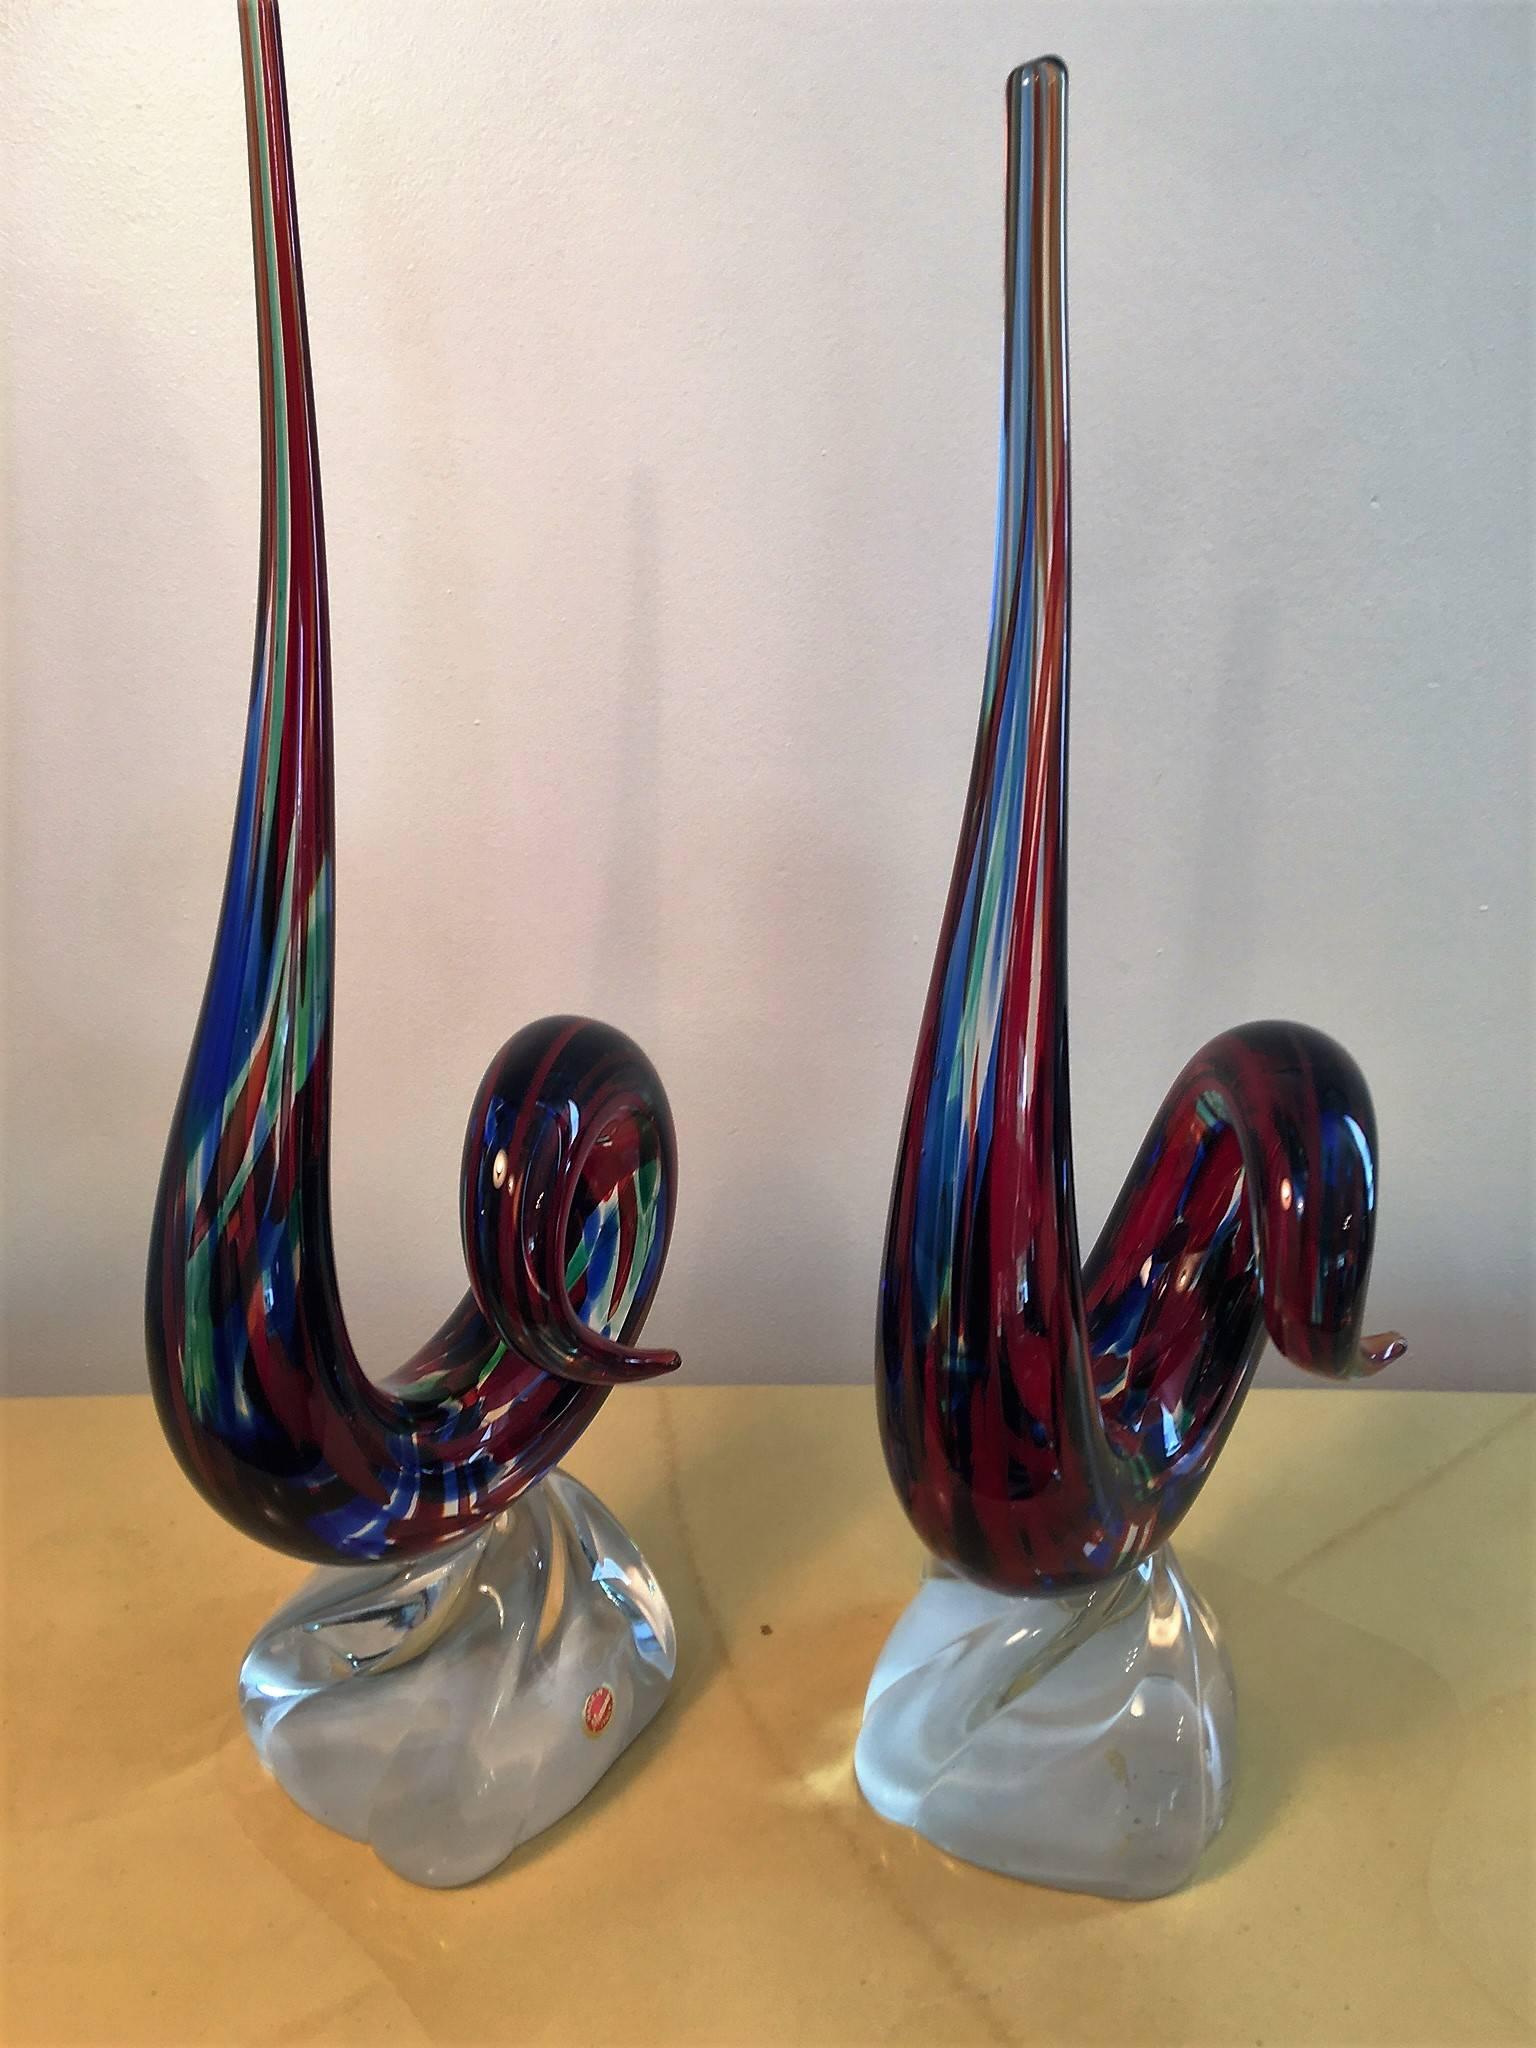 Pair of Modernistic Murano Glass Sculptures in the Manner of Fulvio Bianconi In Excellent Condition For Sale In Mount Penn, PA